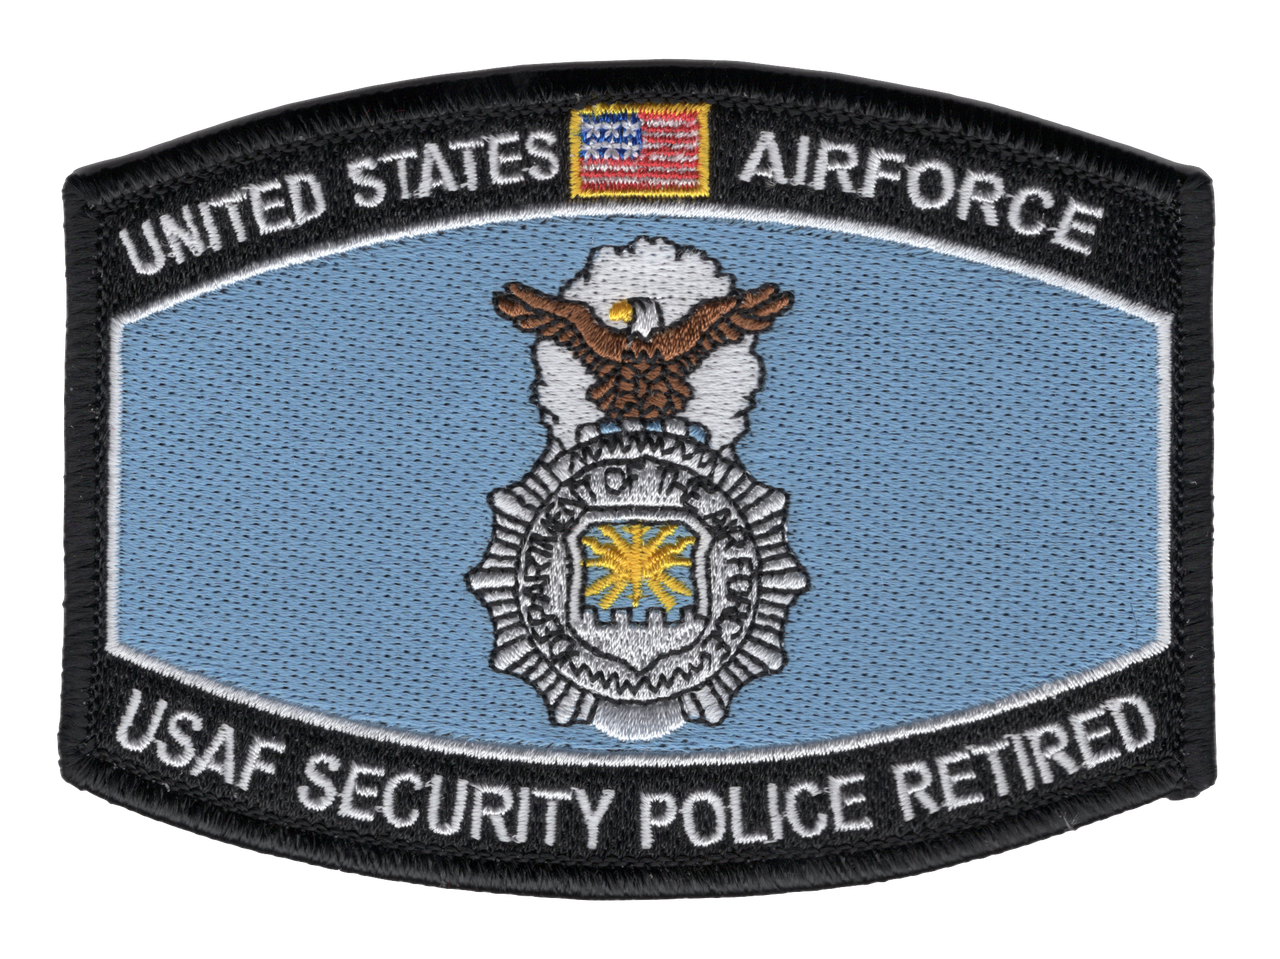 United States Air Force Security Police Retired Patch